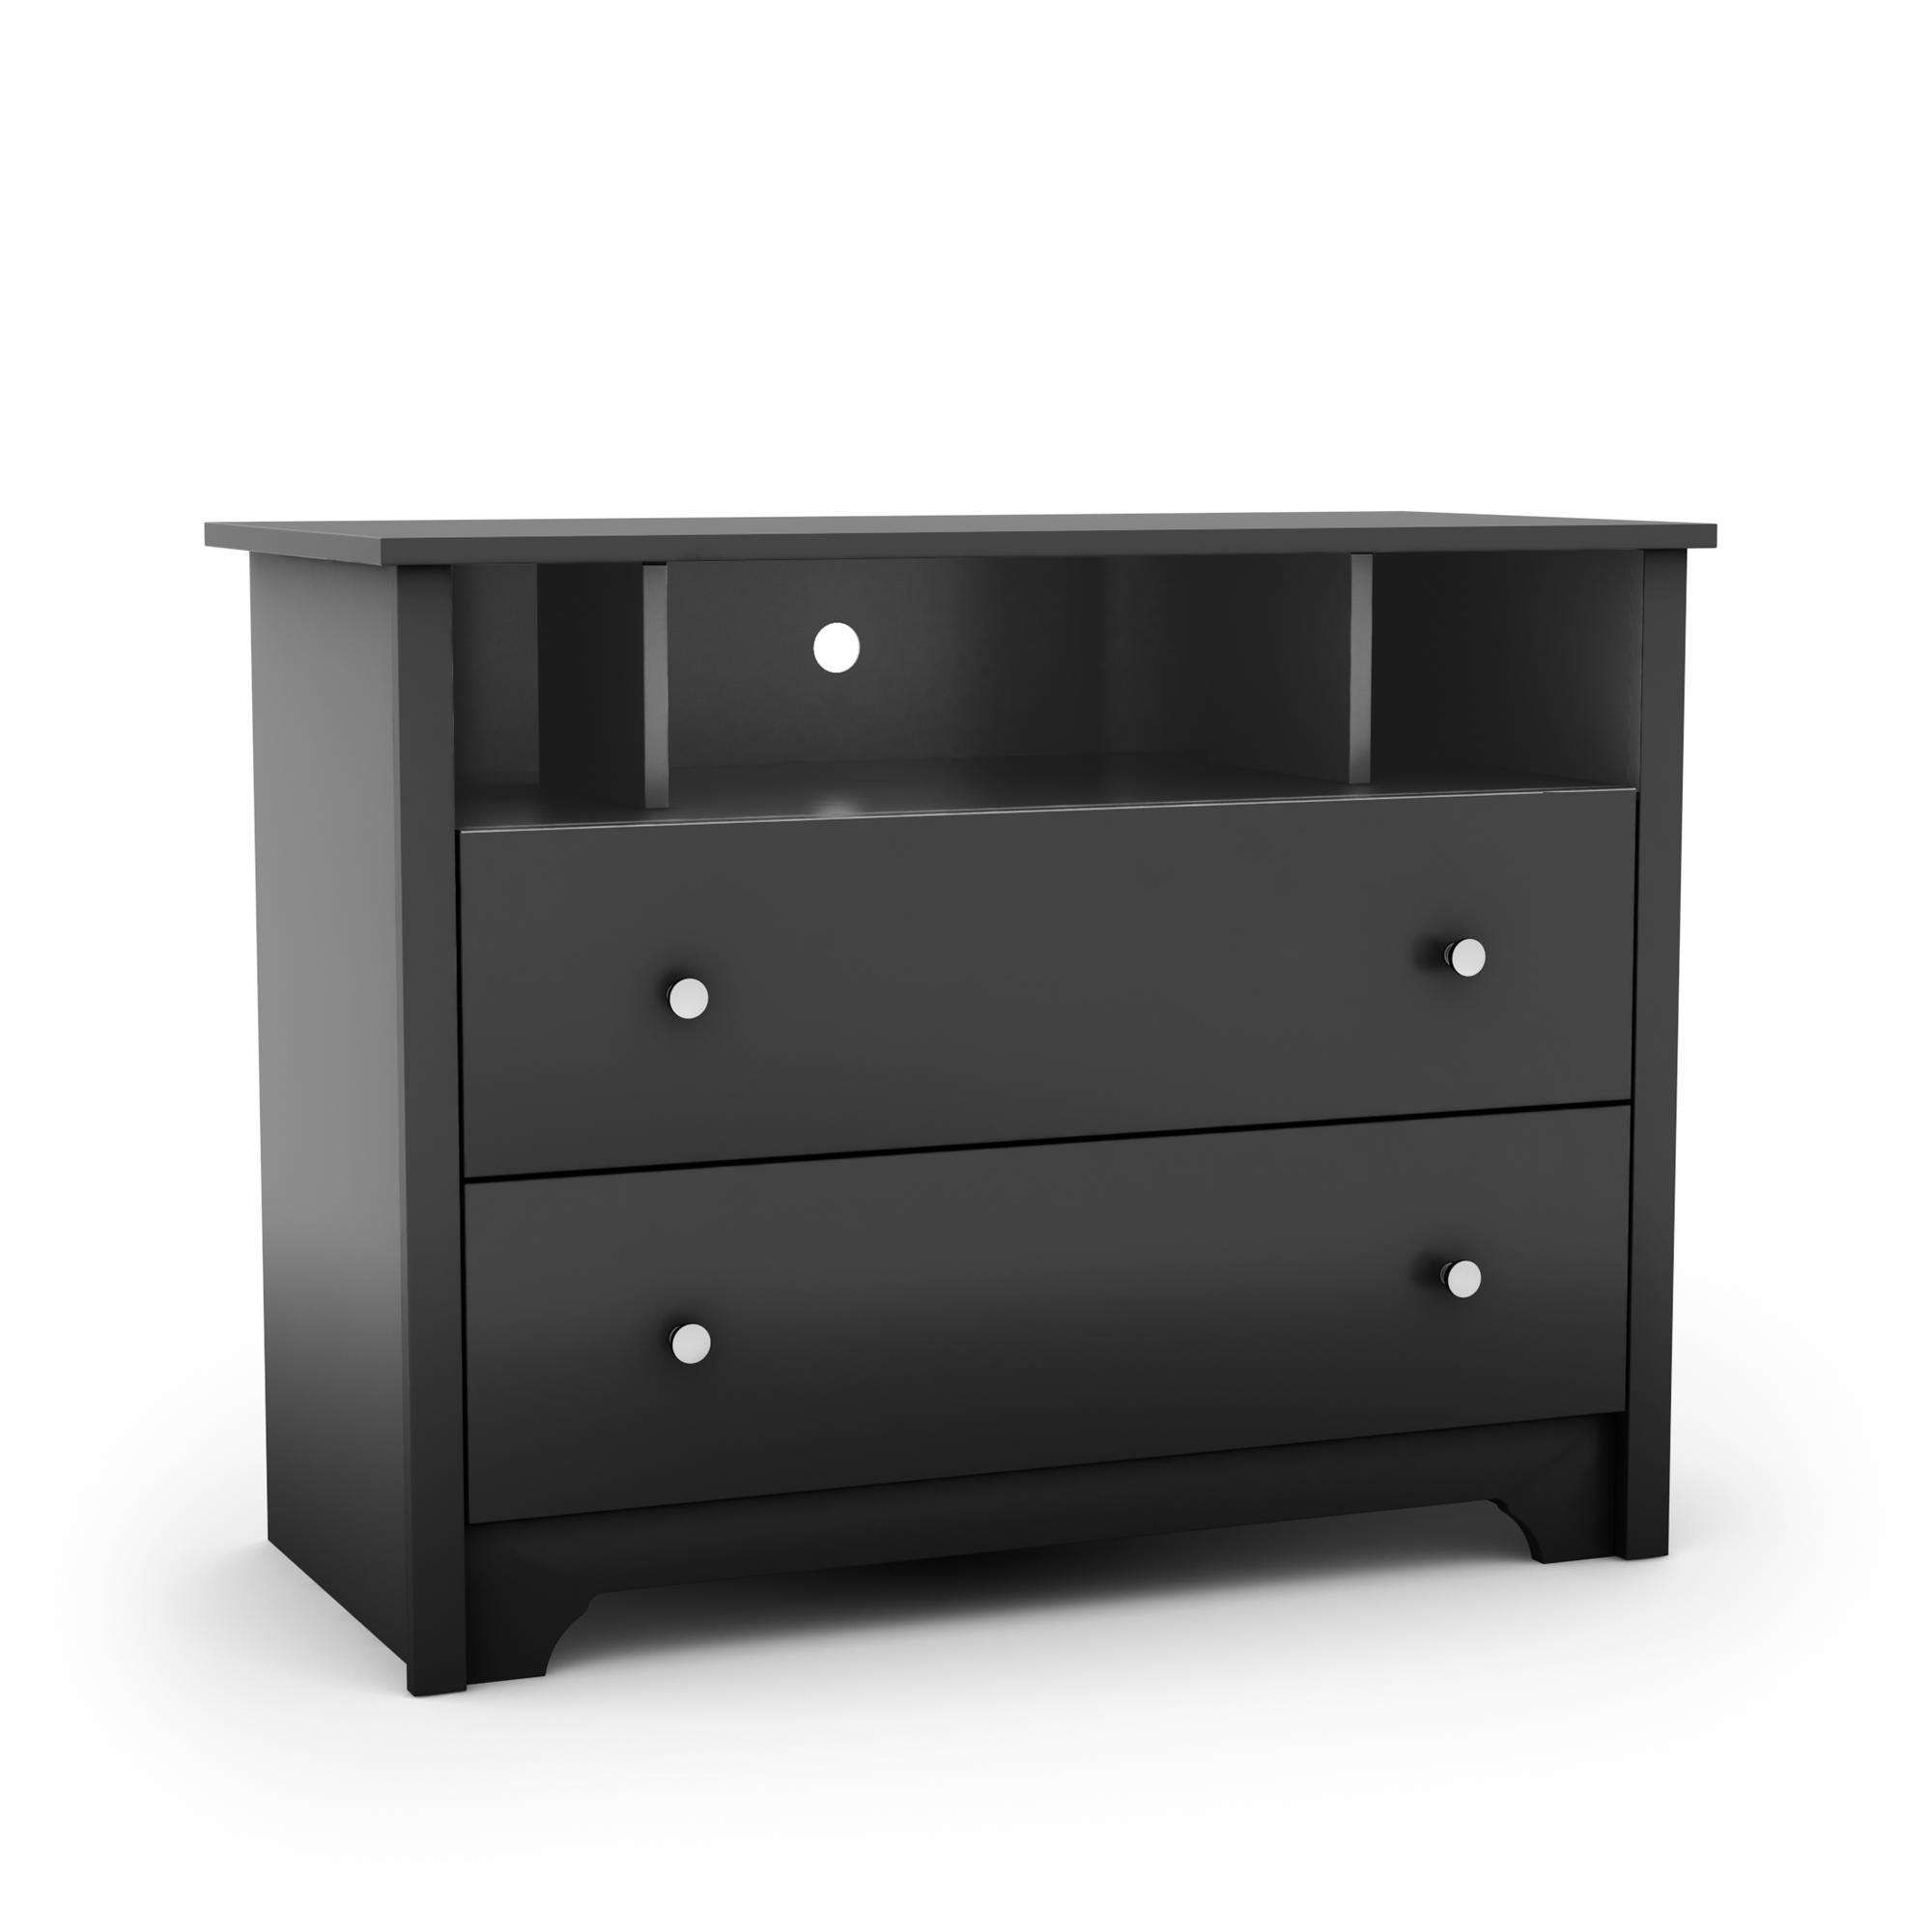 Square Black Tv Stand With Storage Drawers And Shelves Of Cool Tv Throughout Black Tv Stands With Drawers (Gallery 2 of 15)